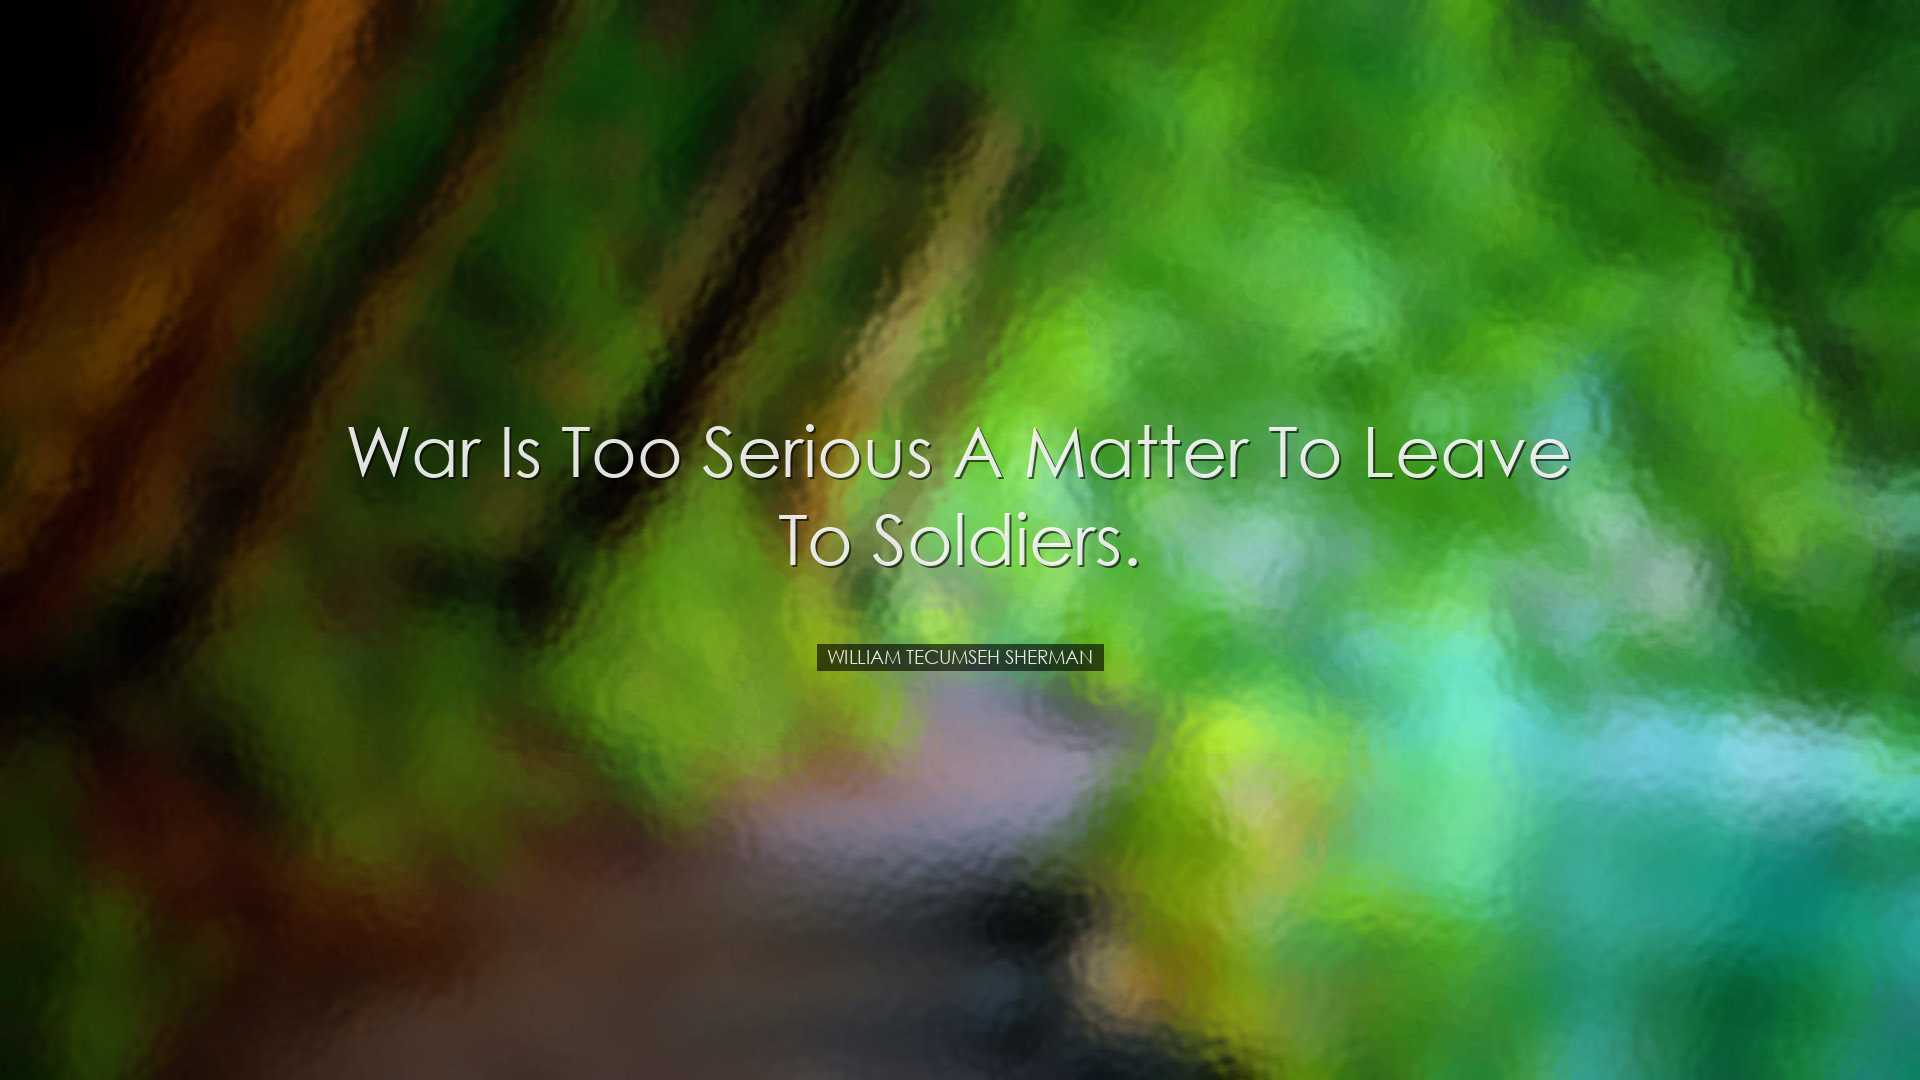 War is too serious a matter to leave to soldiers. - William Tecums